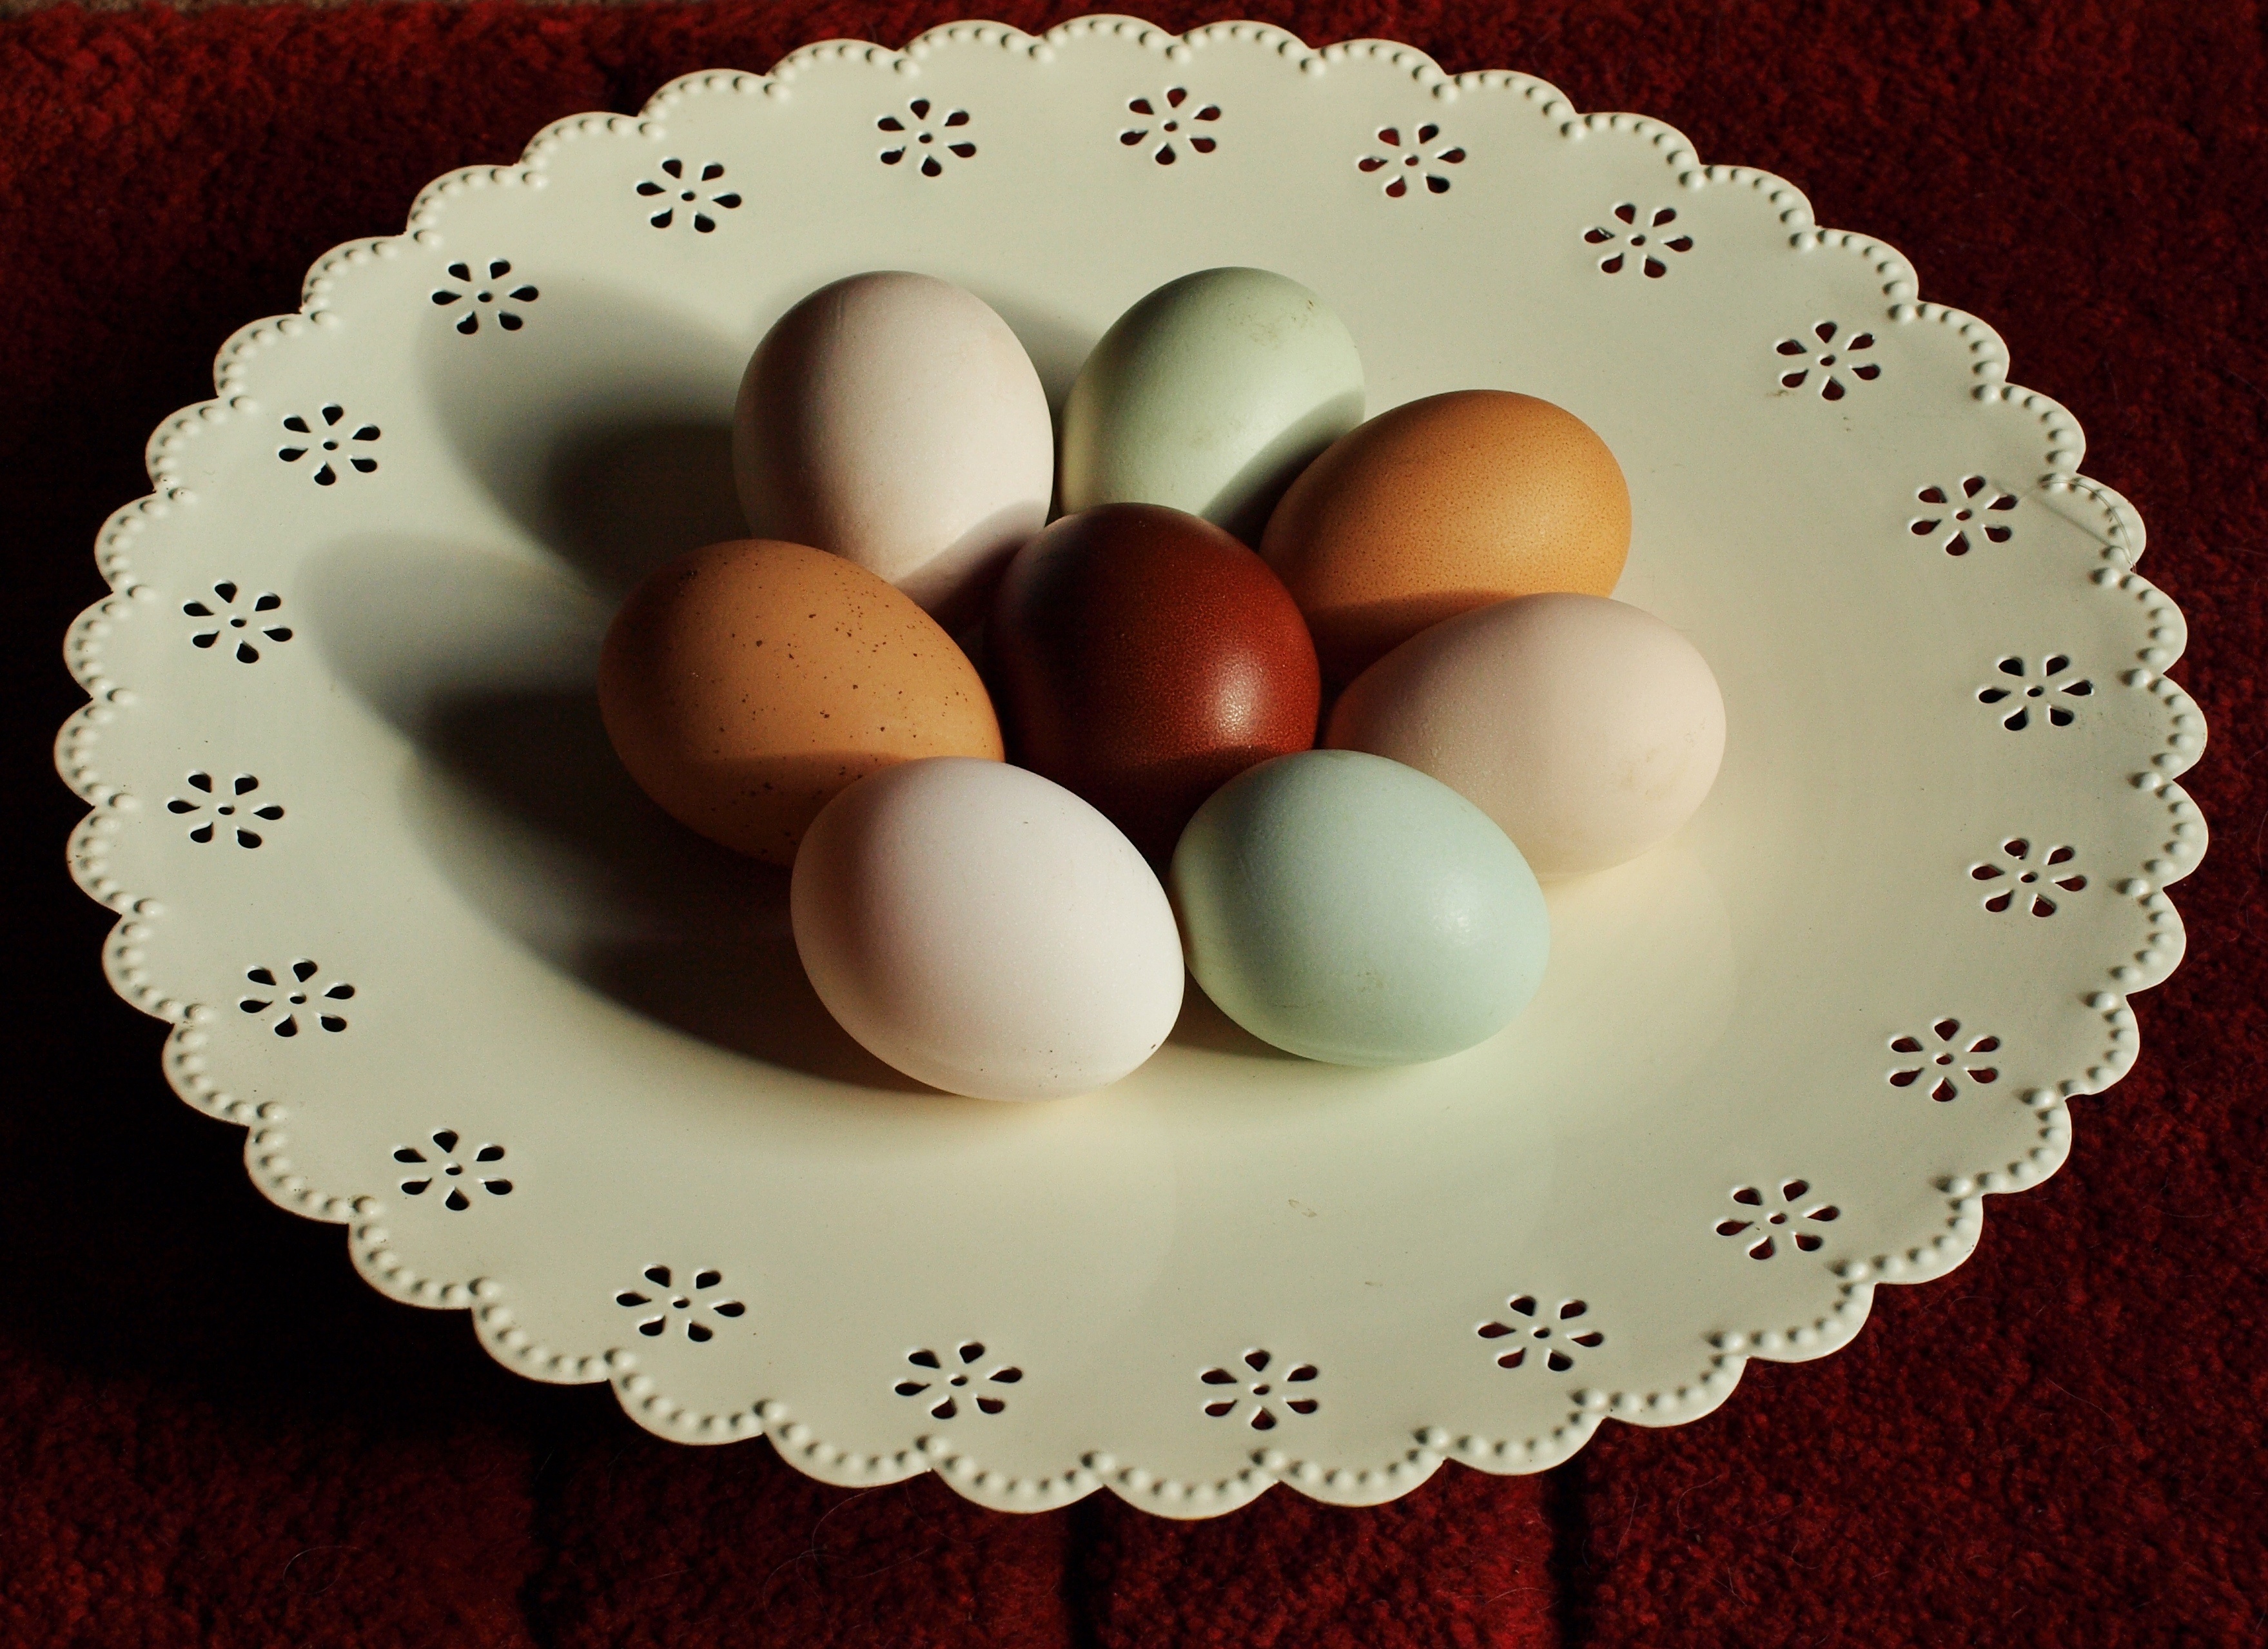 A selection of amazing coloured eggs on a plate.